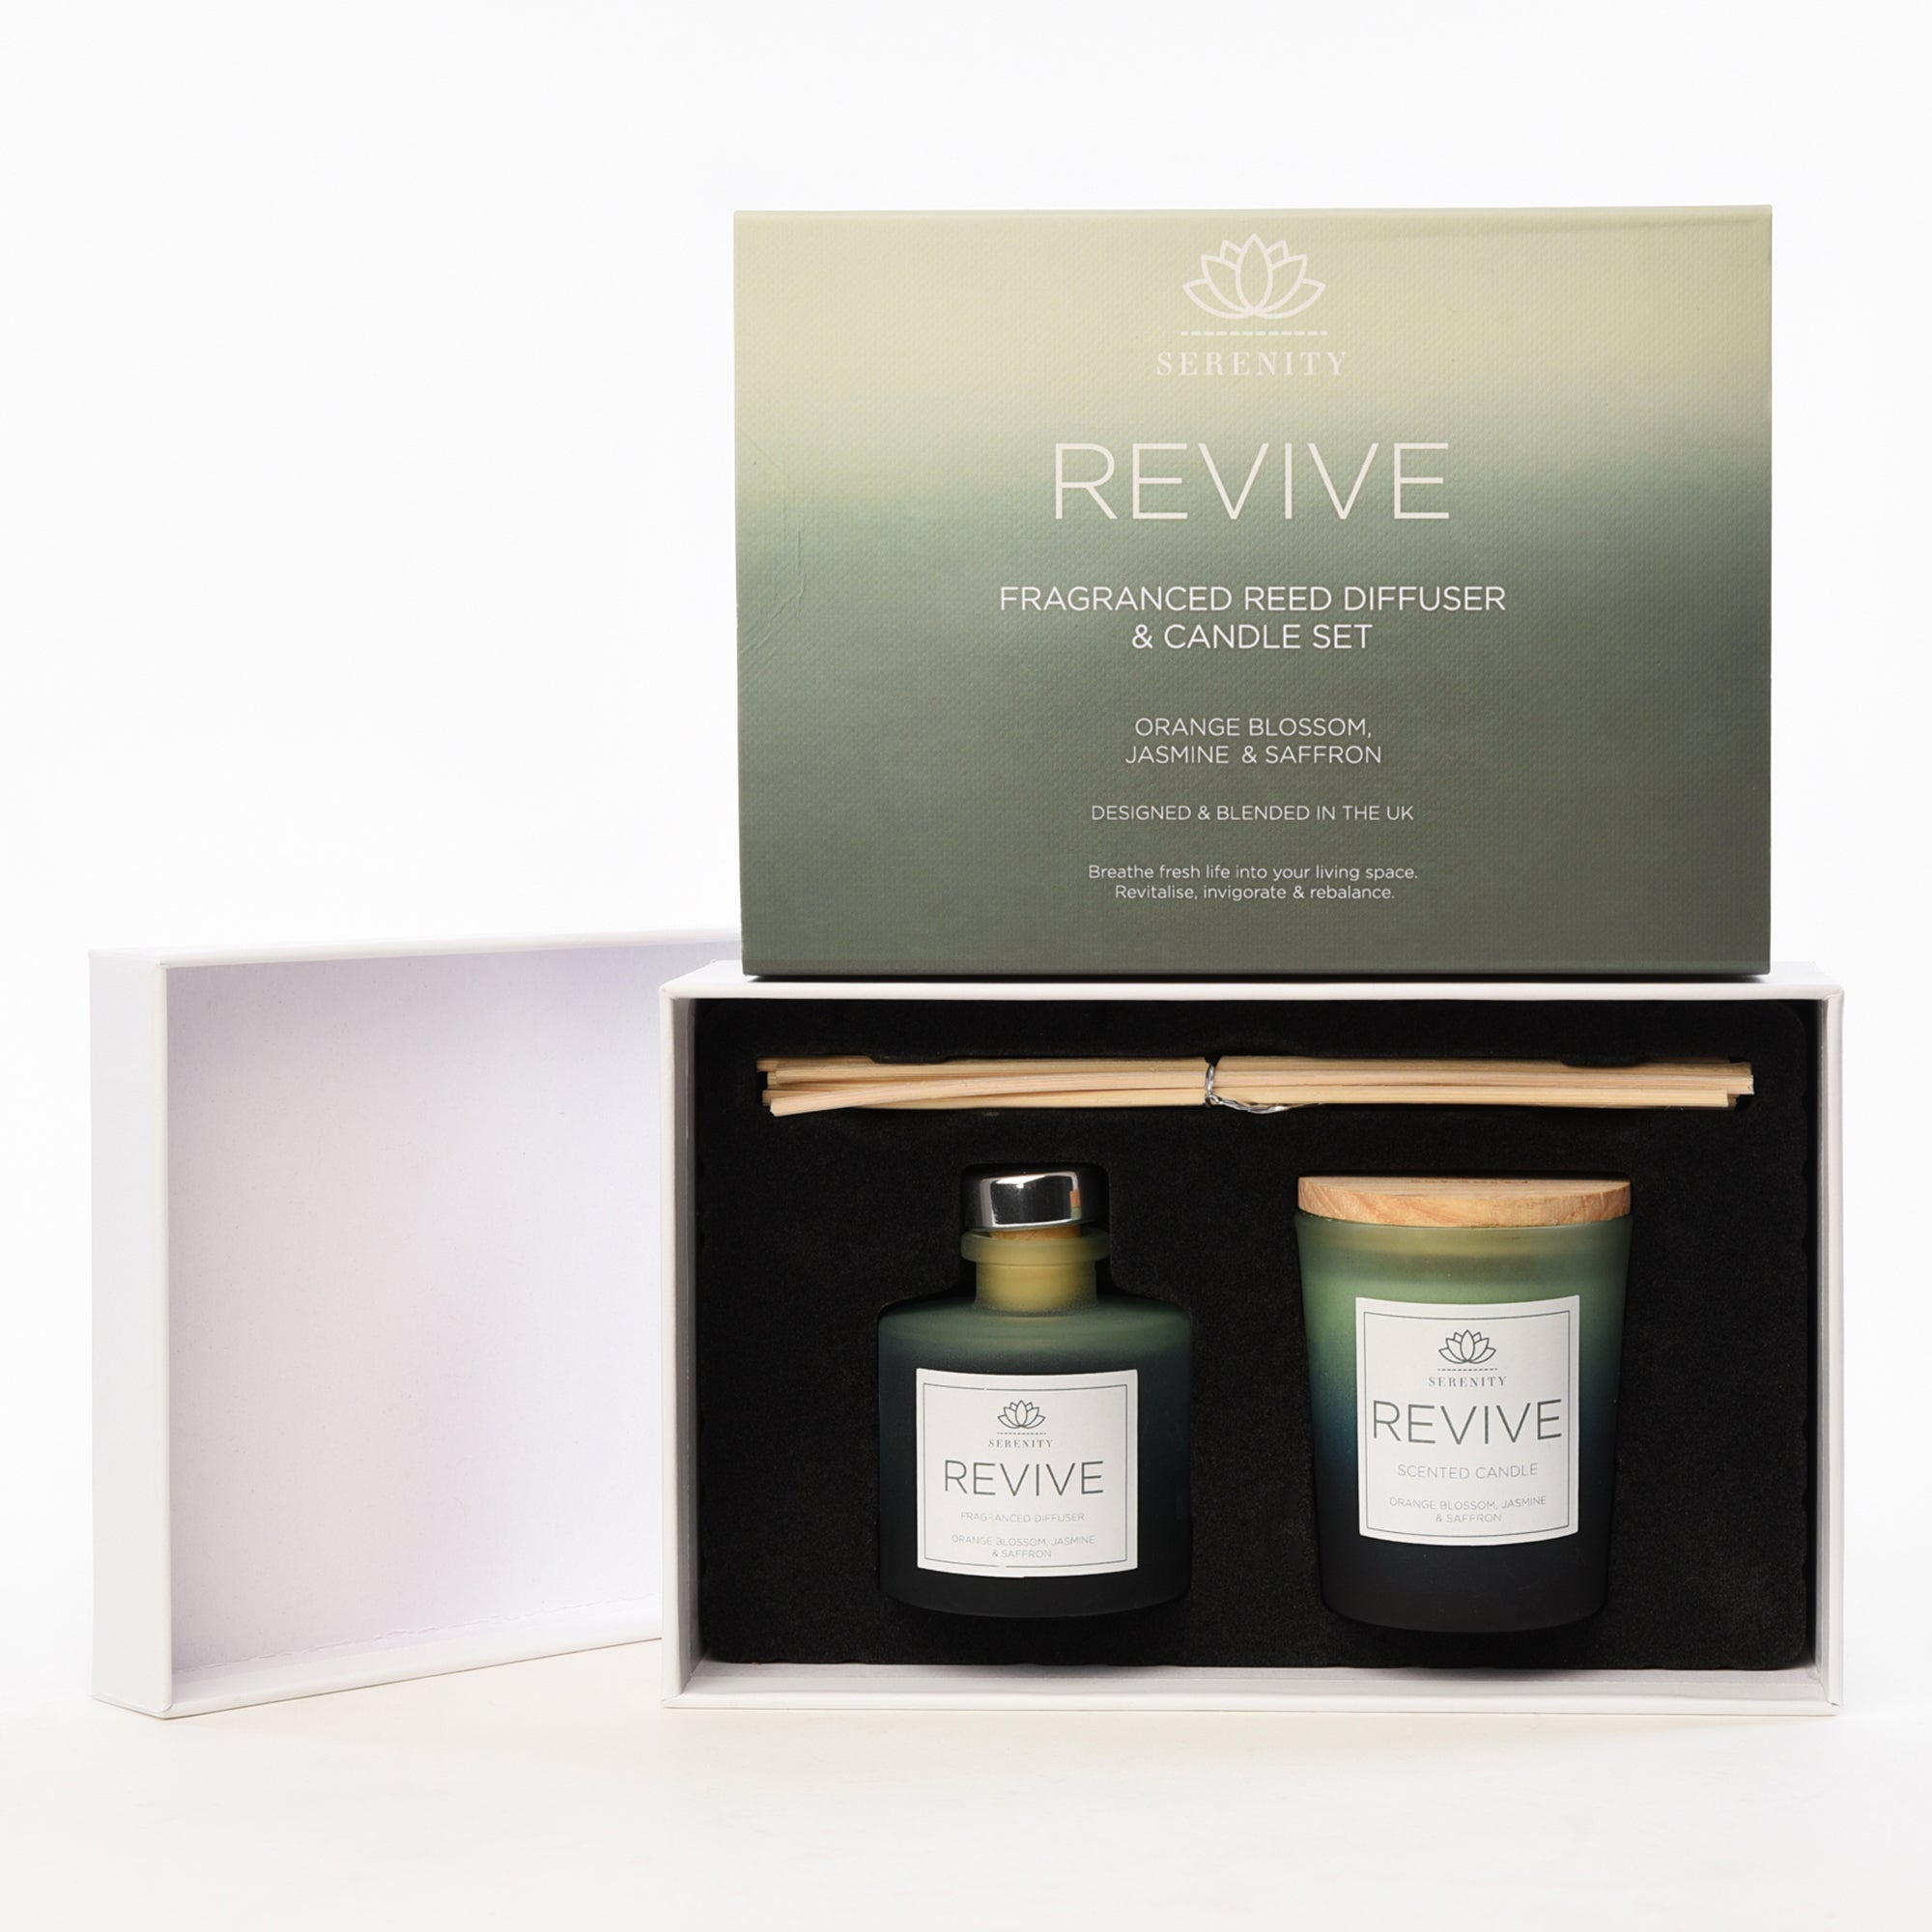 Serenity Revive Candle and Diffuser Gift Set